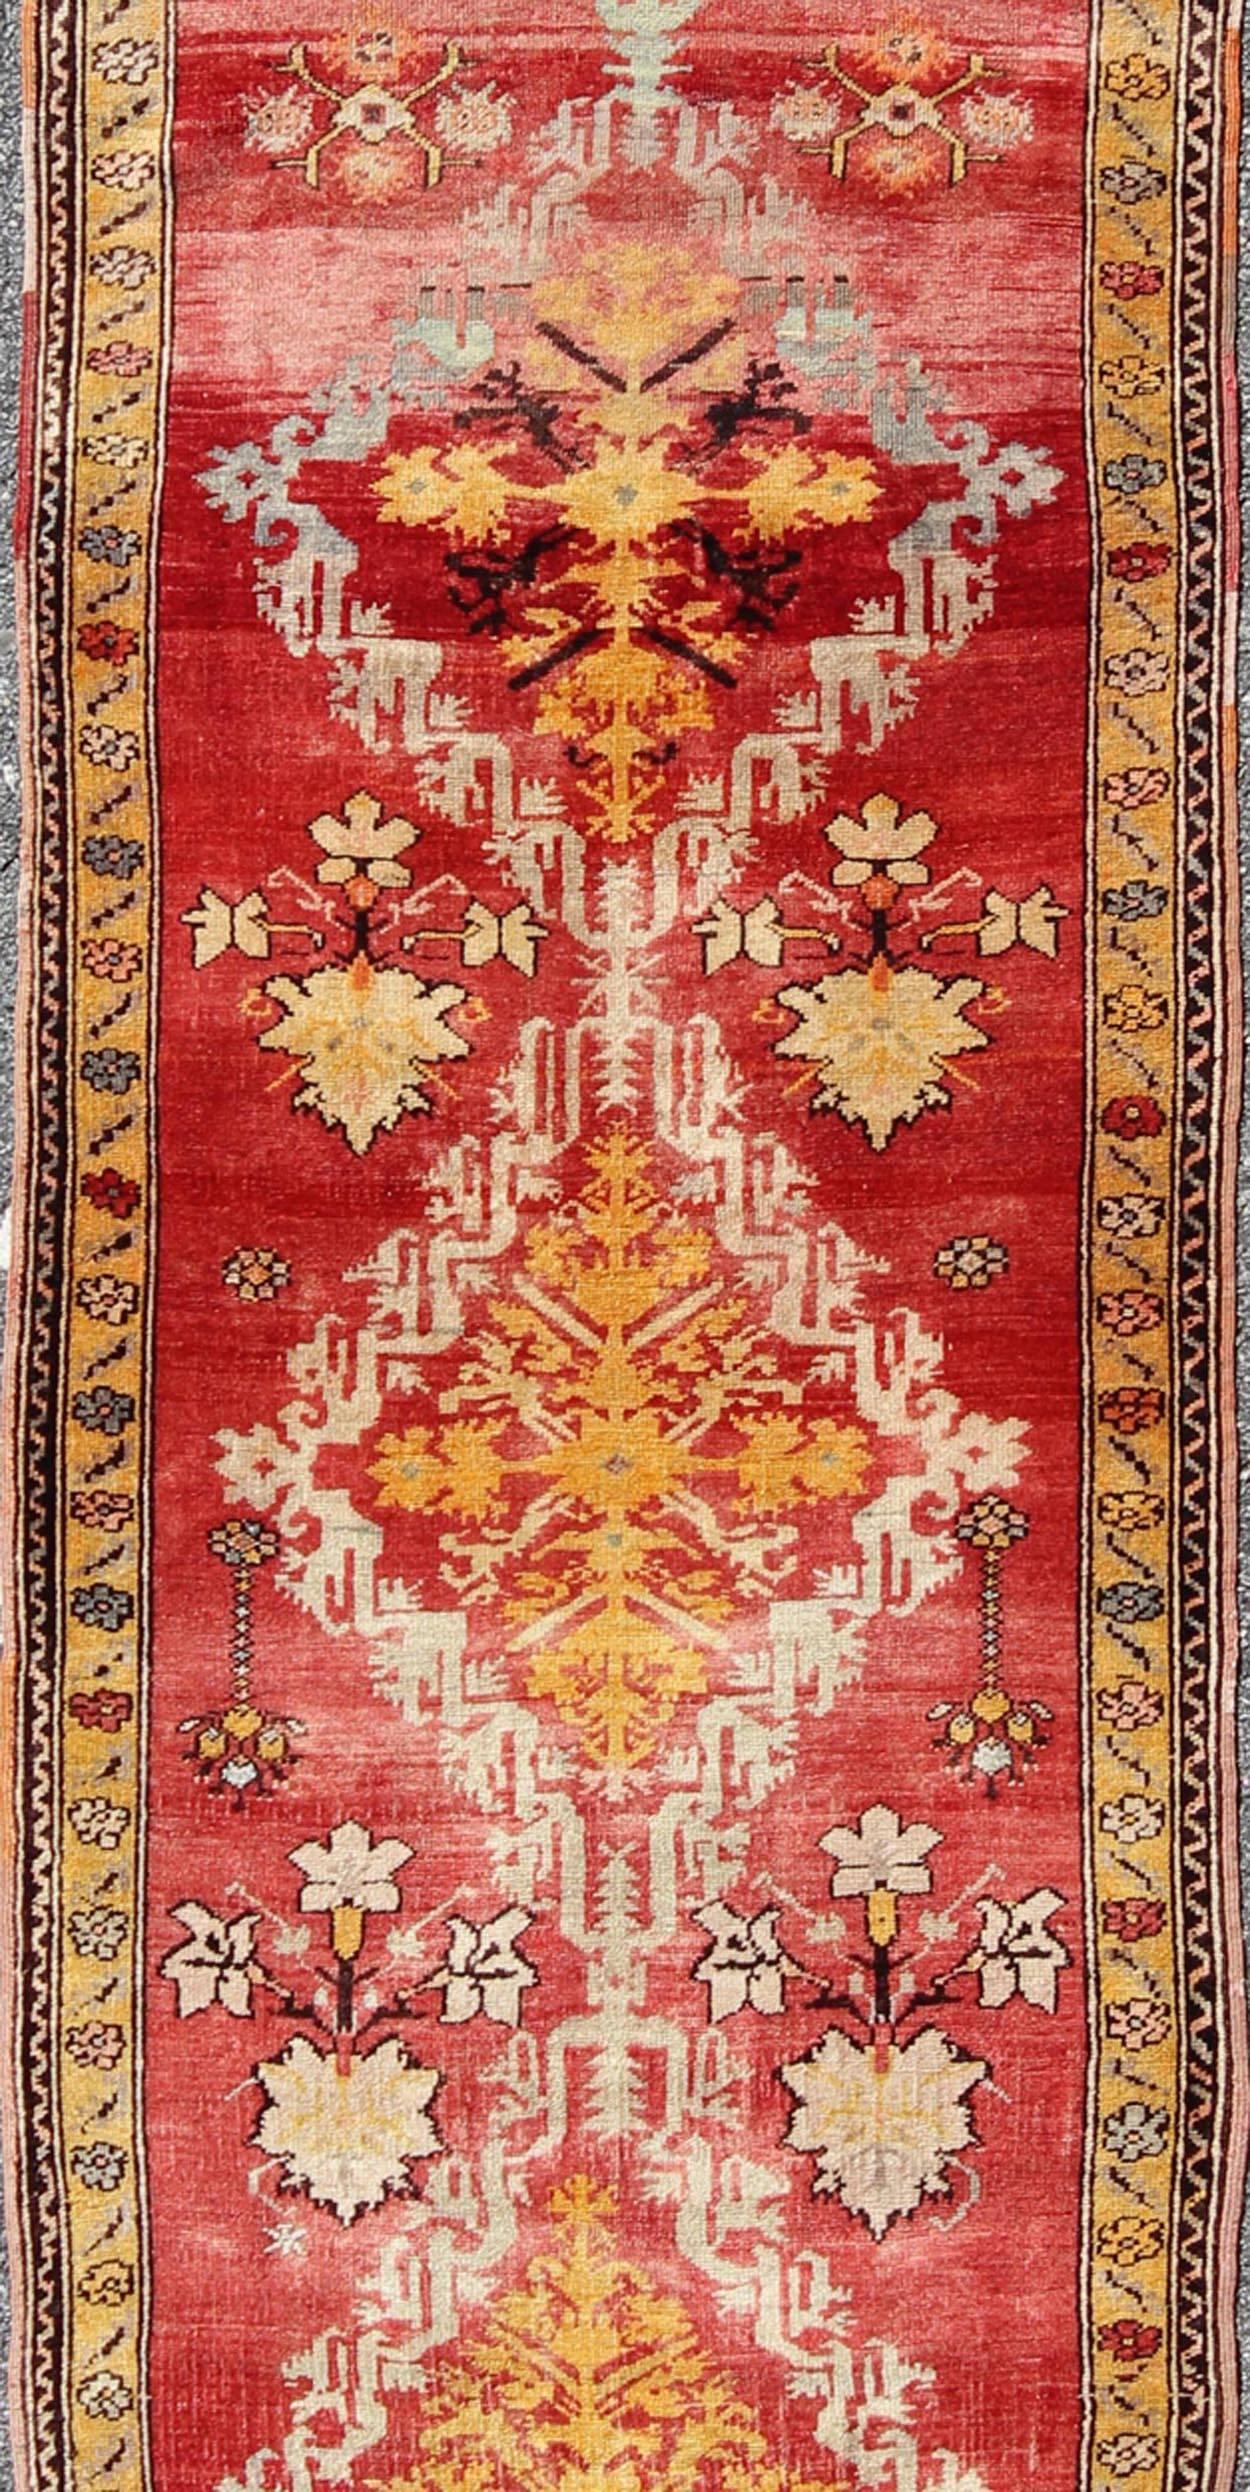 Antique Turkish Oushak Runner with Tribal Medallions in Red, Orange, and Yellow In Excellent Condition For Sale In Atlanta, GA